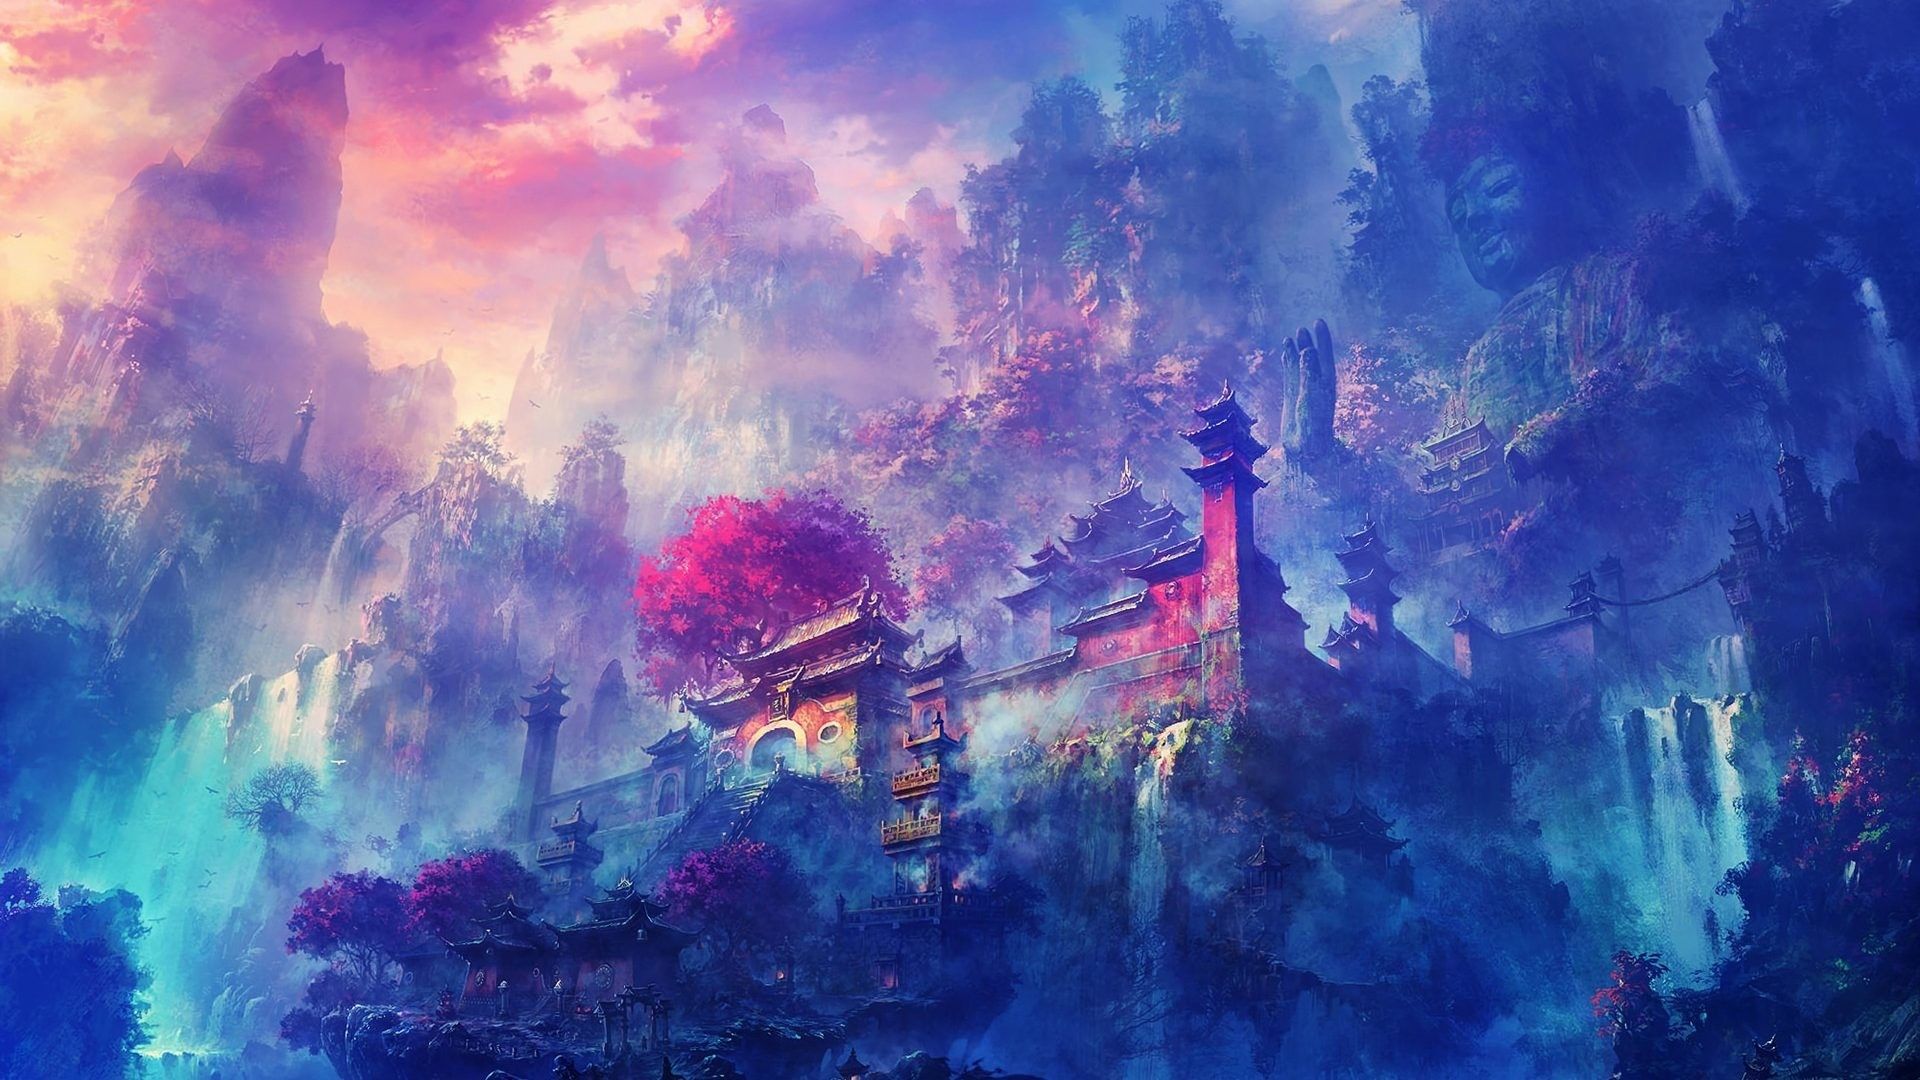 A beautiful digital painting of a fantasy castle in the mountains - Anime landscape